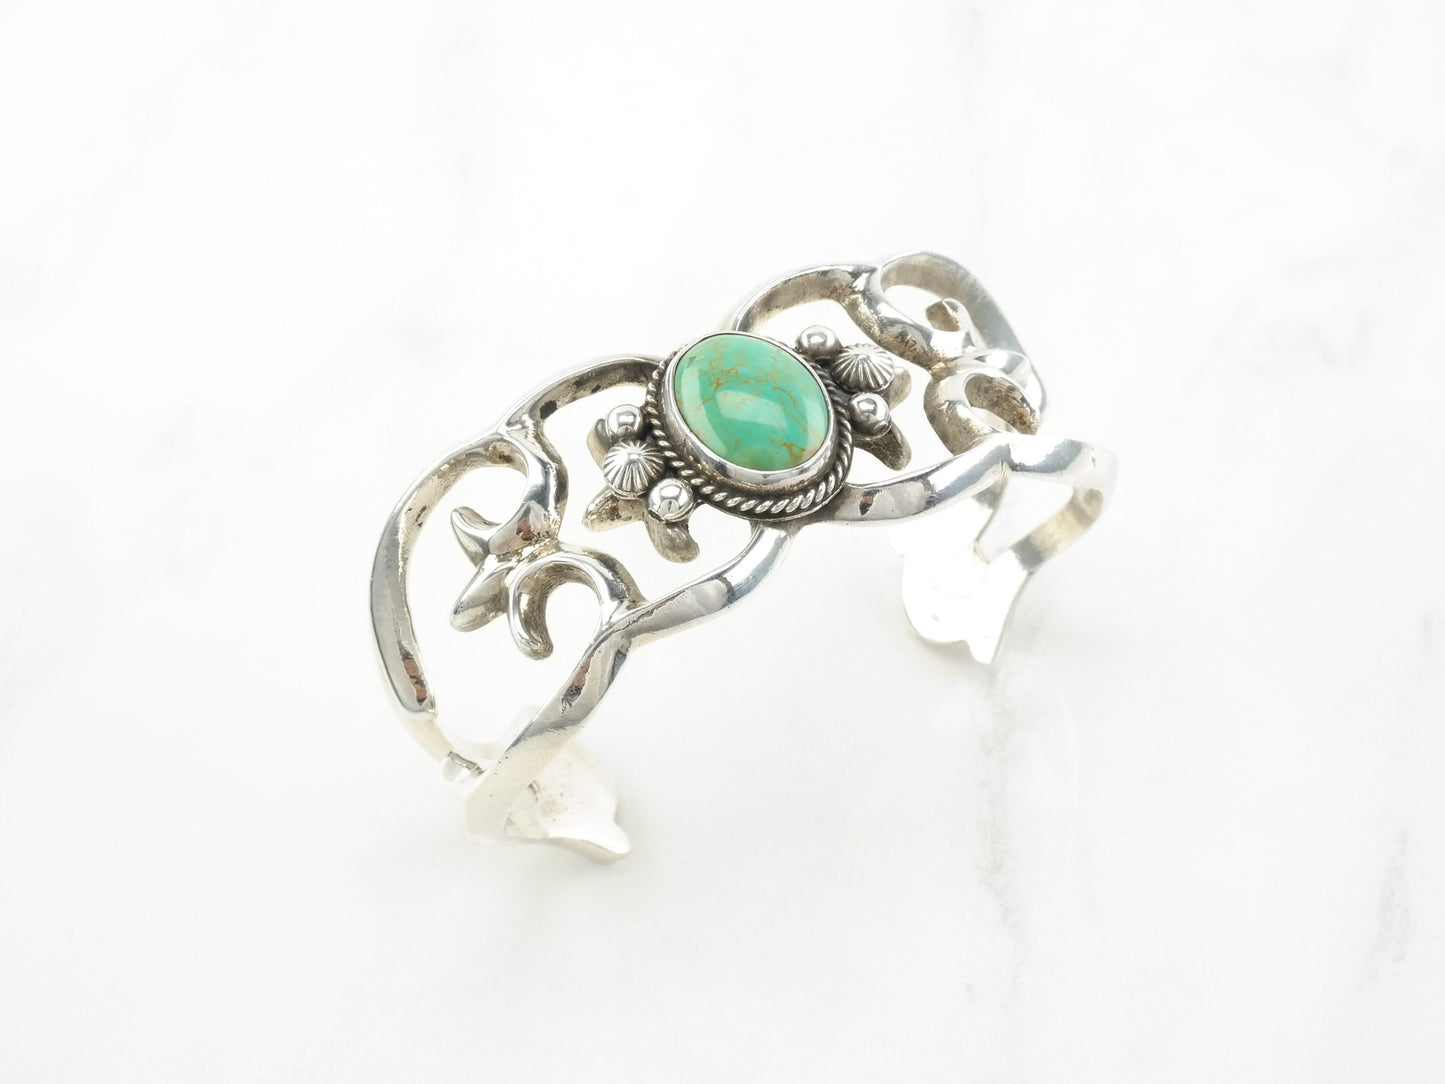 Navajo Sterling Silver Cuff Bracelet Green Turquoise